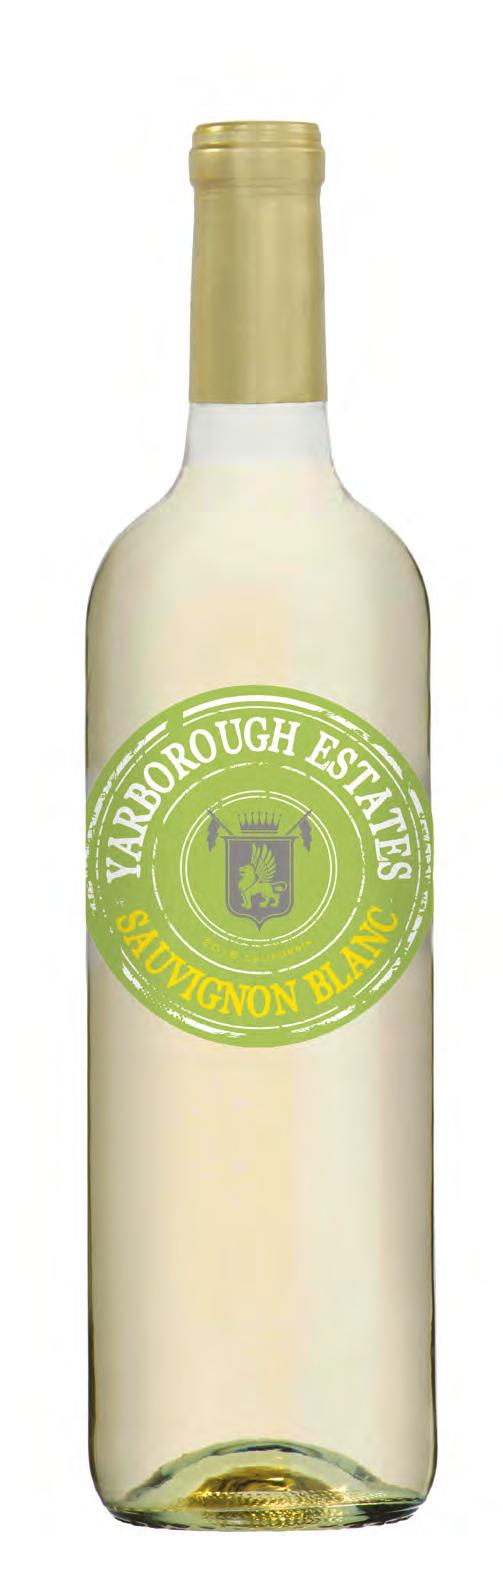 YARBOROUGH ESTATES 2016 SAUVIGNON BLANC CALIFORNIA There is no insider knowledge with this fun wine! This 2016 Yarborough Estates Sauvignon Blanc is a pure expression of a traditional Sauvignon Blanc.